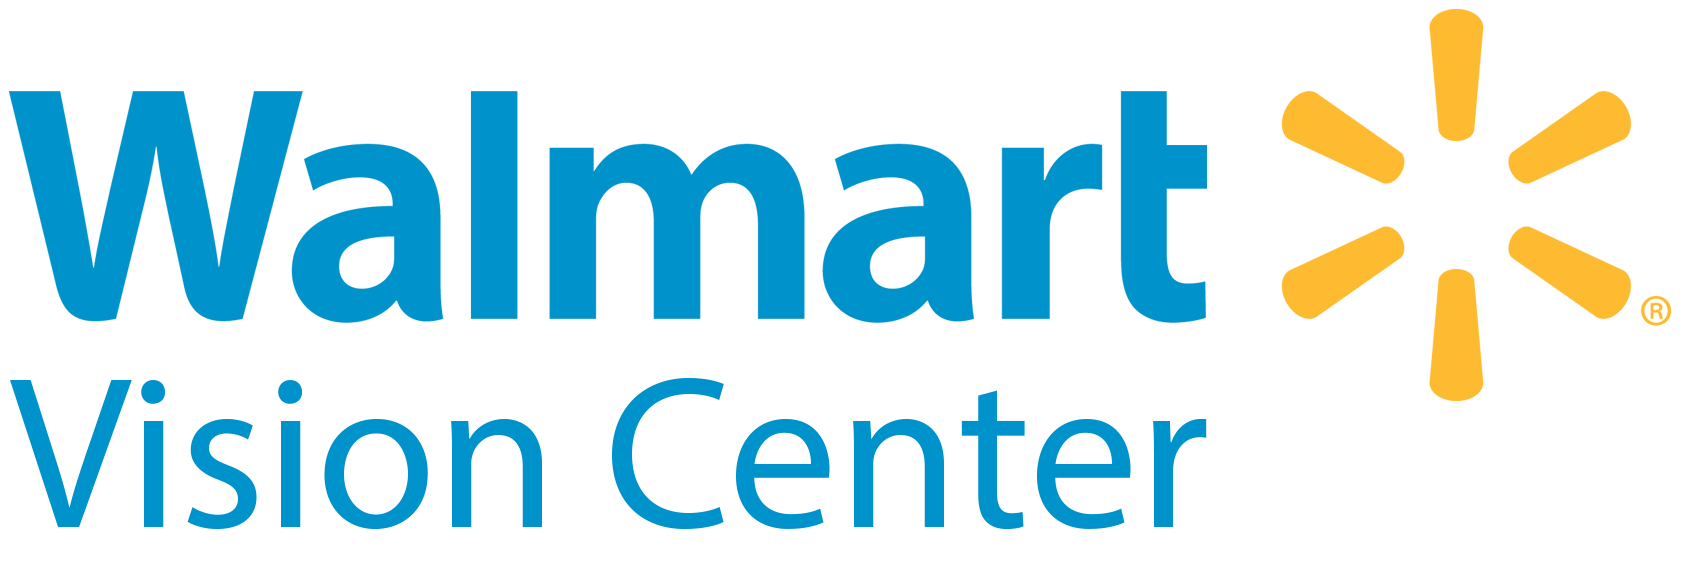 Why Prescription Safety Glasses at Walmart Have Become The Go-To Option For On-site Protection - Working with Walmart Vision Center